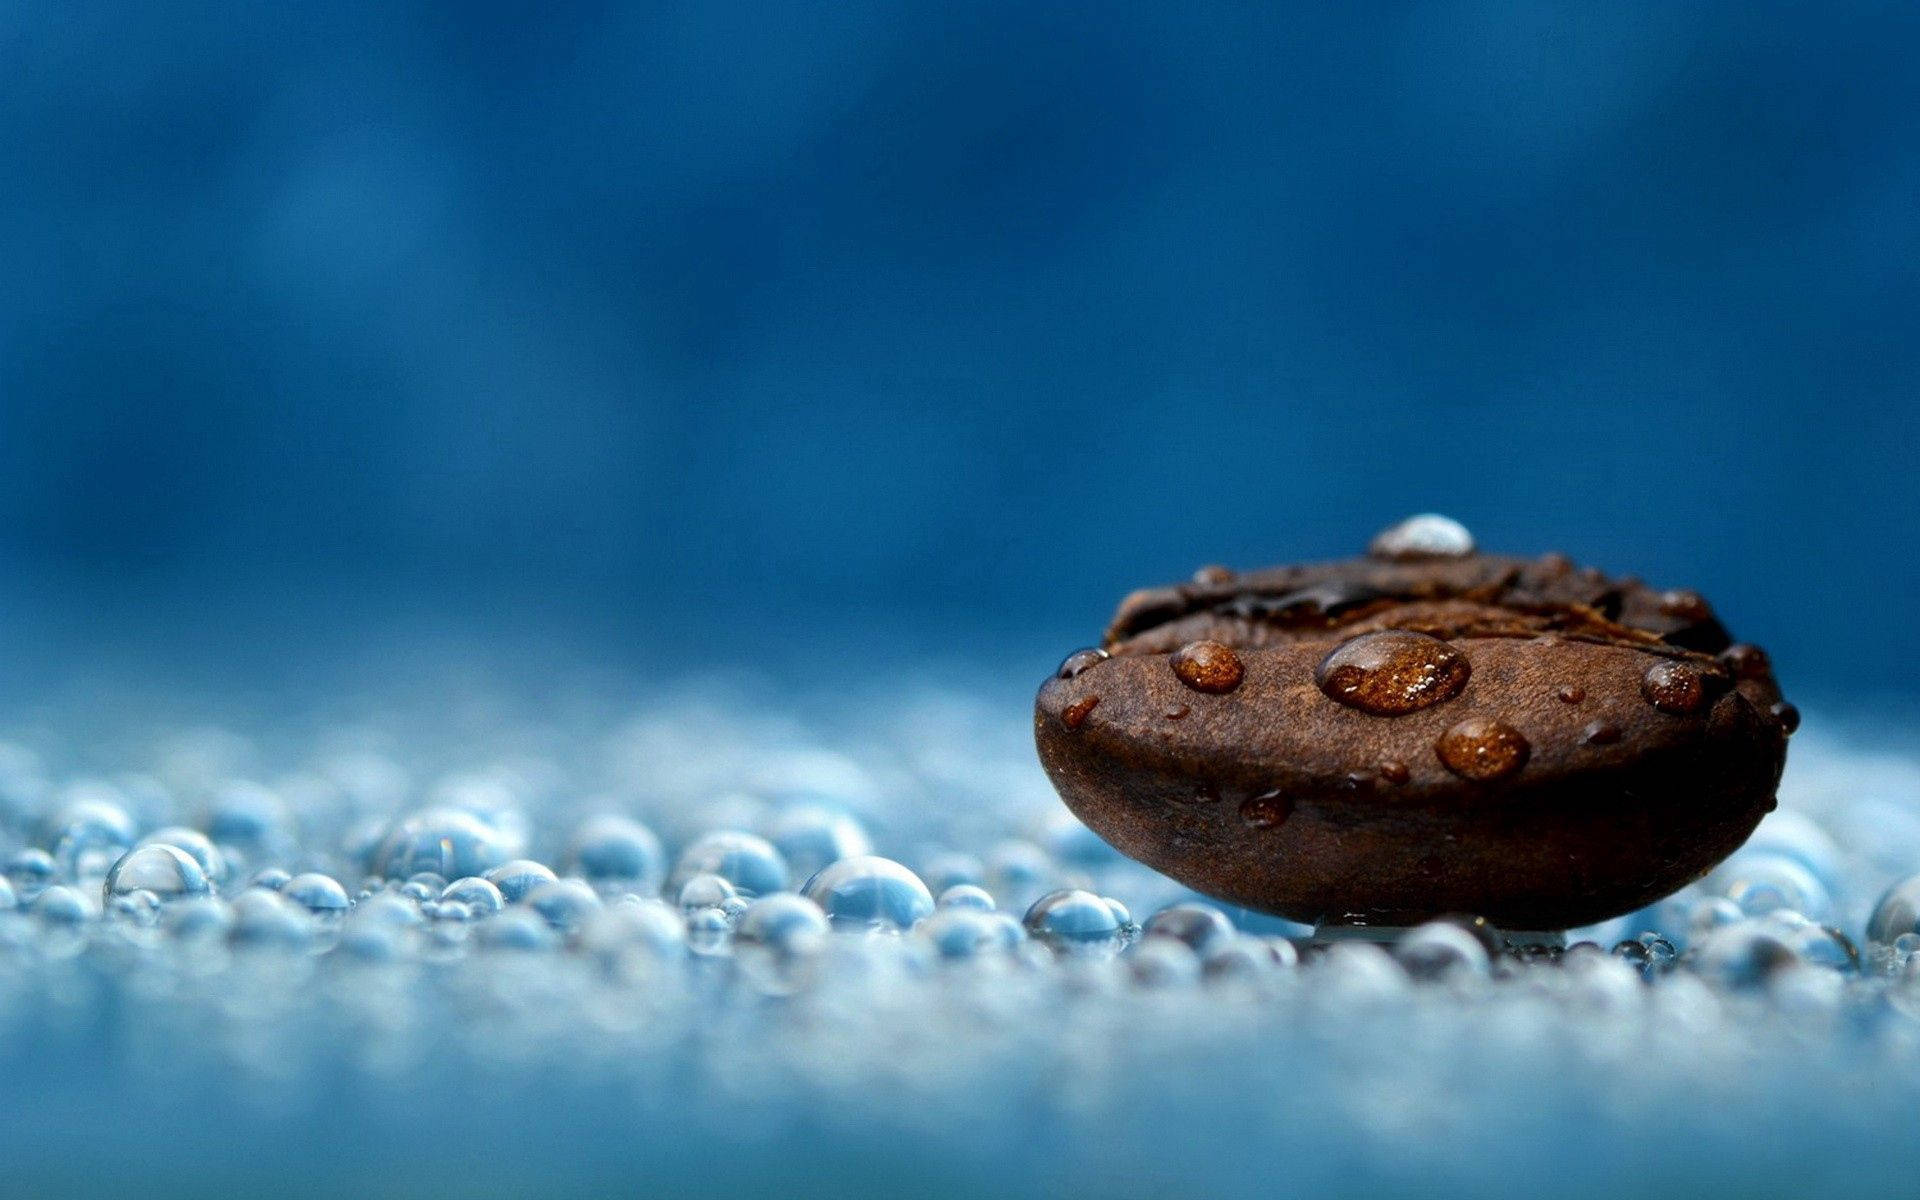 Water Droplets On Coffee Bean